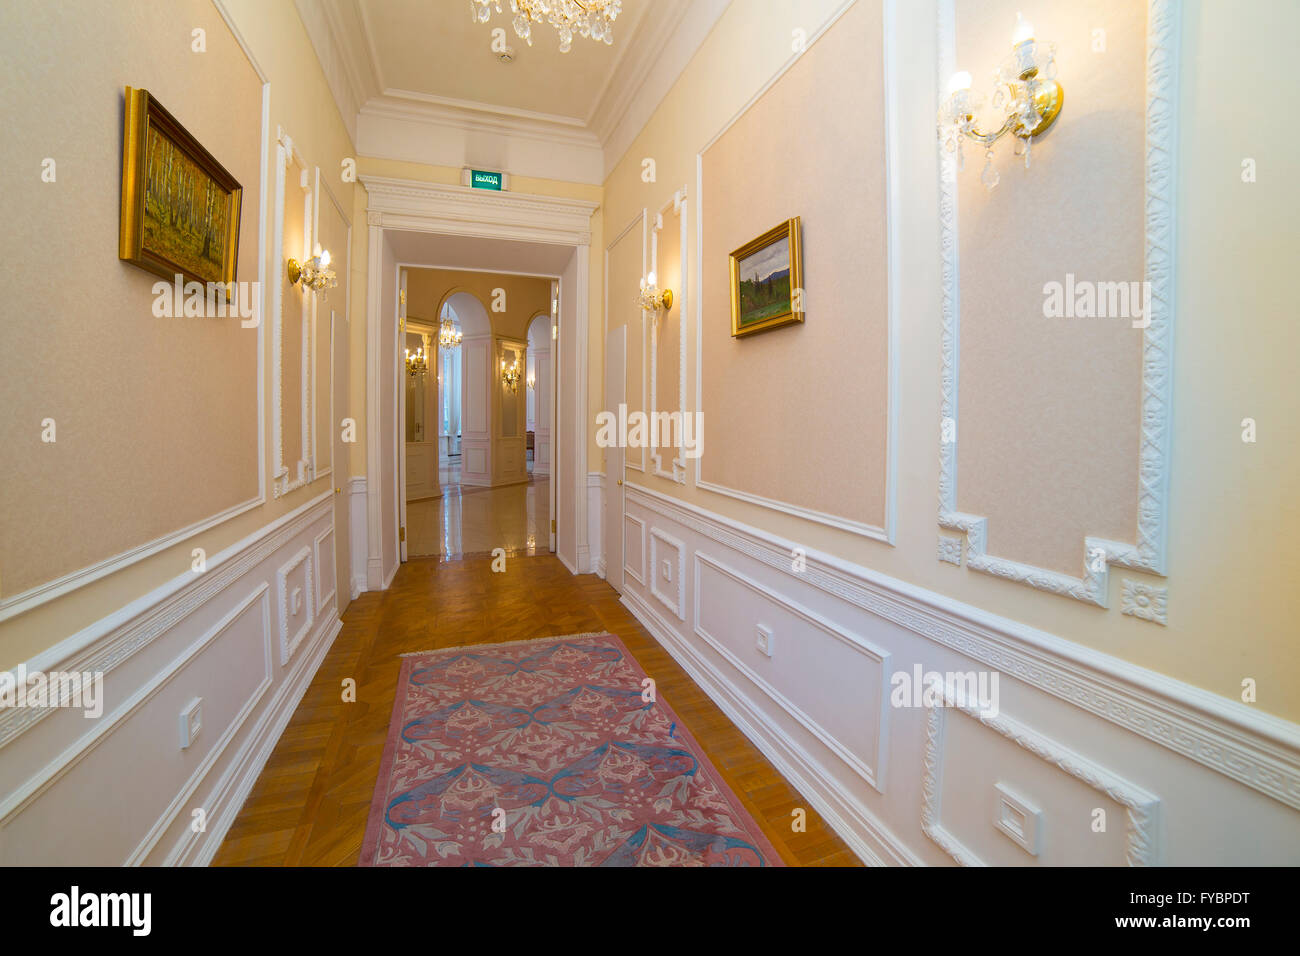 Classic Mansion Interiors Corridor With Pictures Moscow